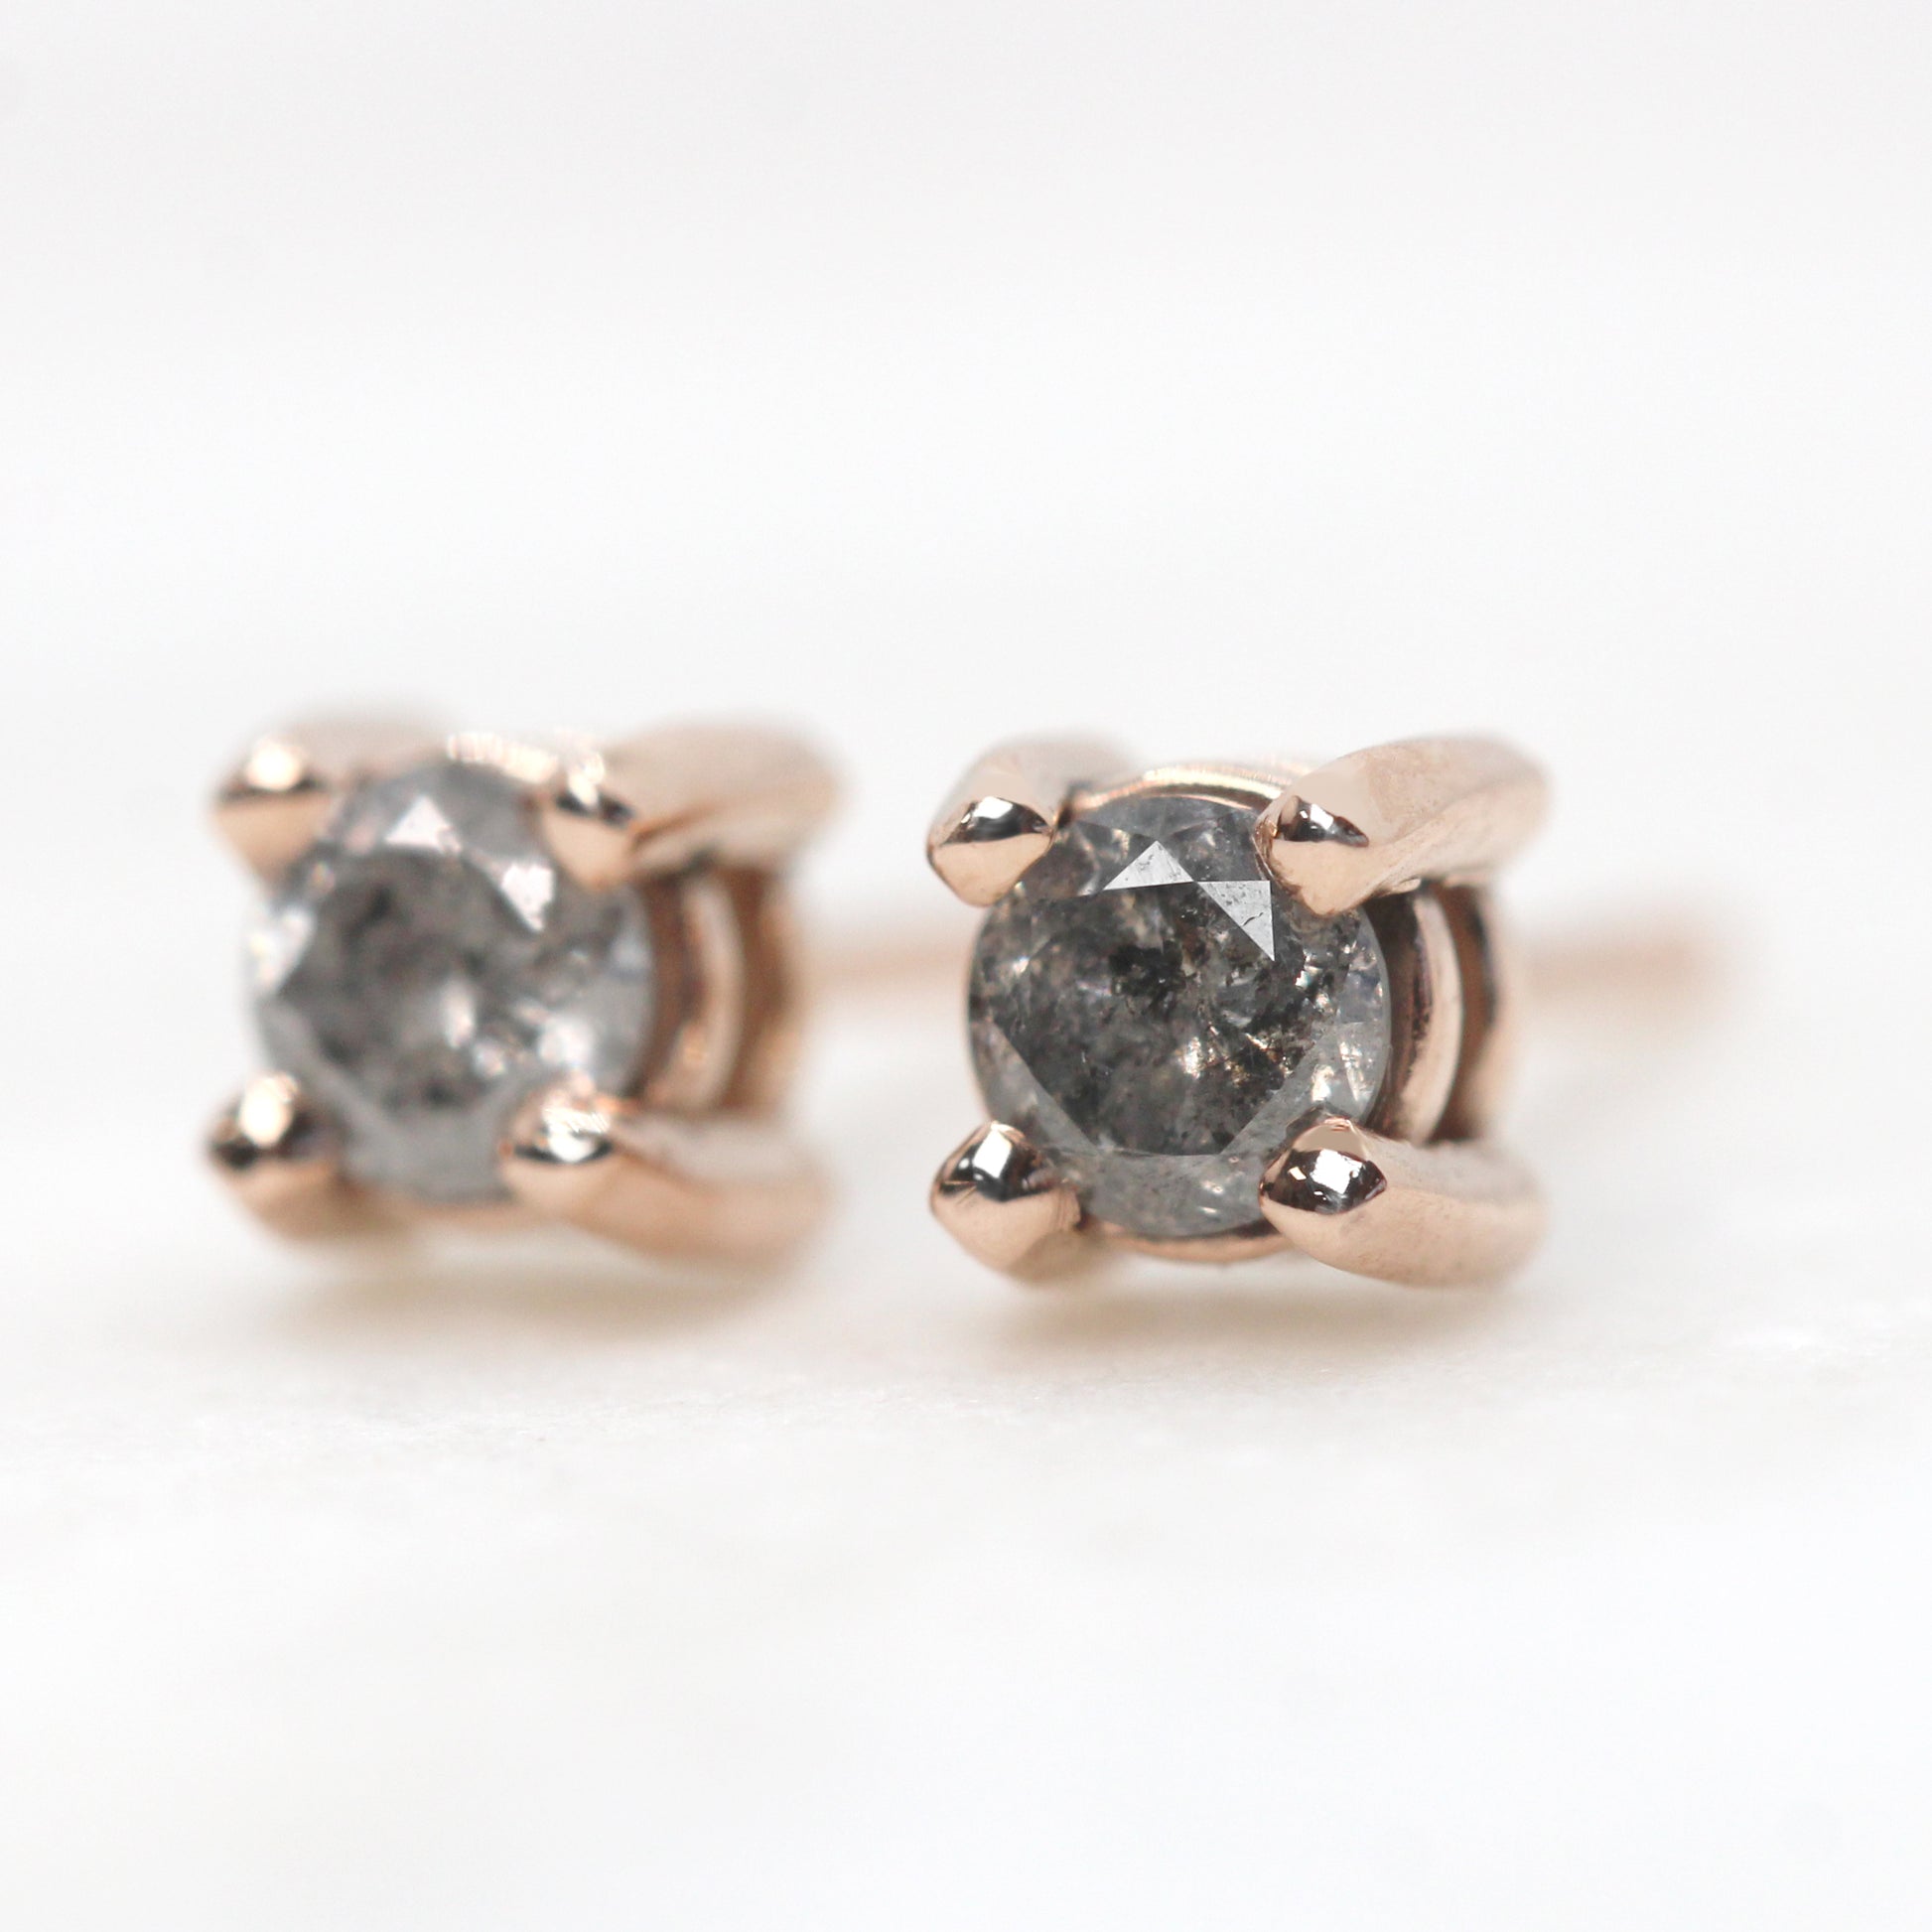 14k Gold Earring Studs with Gray Celestial Diamonds - Made to Order - Midwinter Co. Alternative Bridal Rings and Modern Fine Jewelry